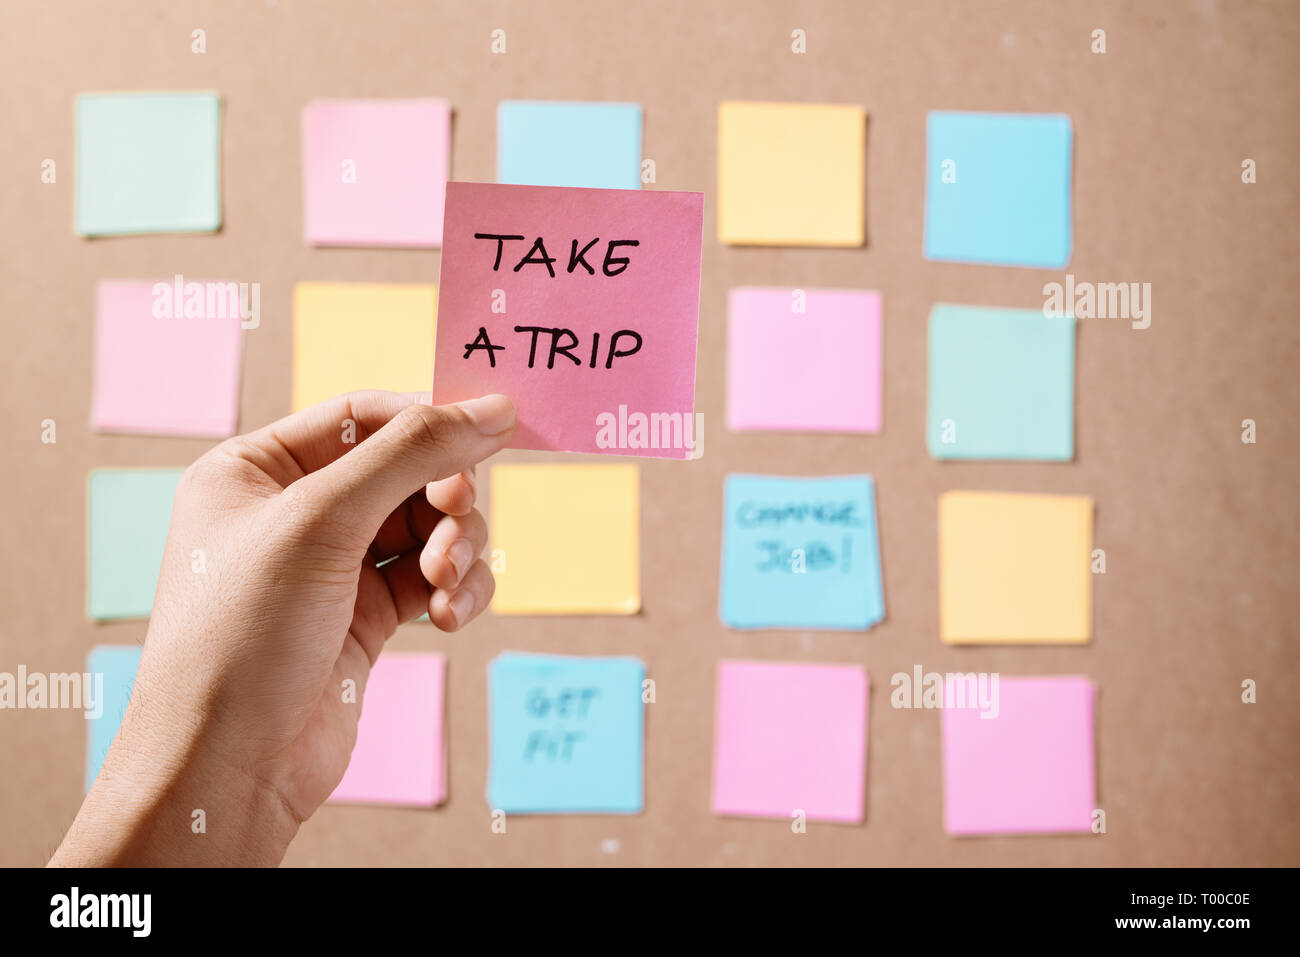 Motivational word 'Take a trip' on pink card Stock Photo